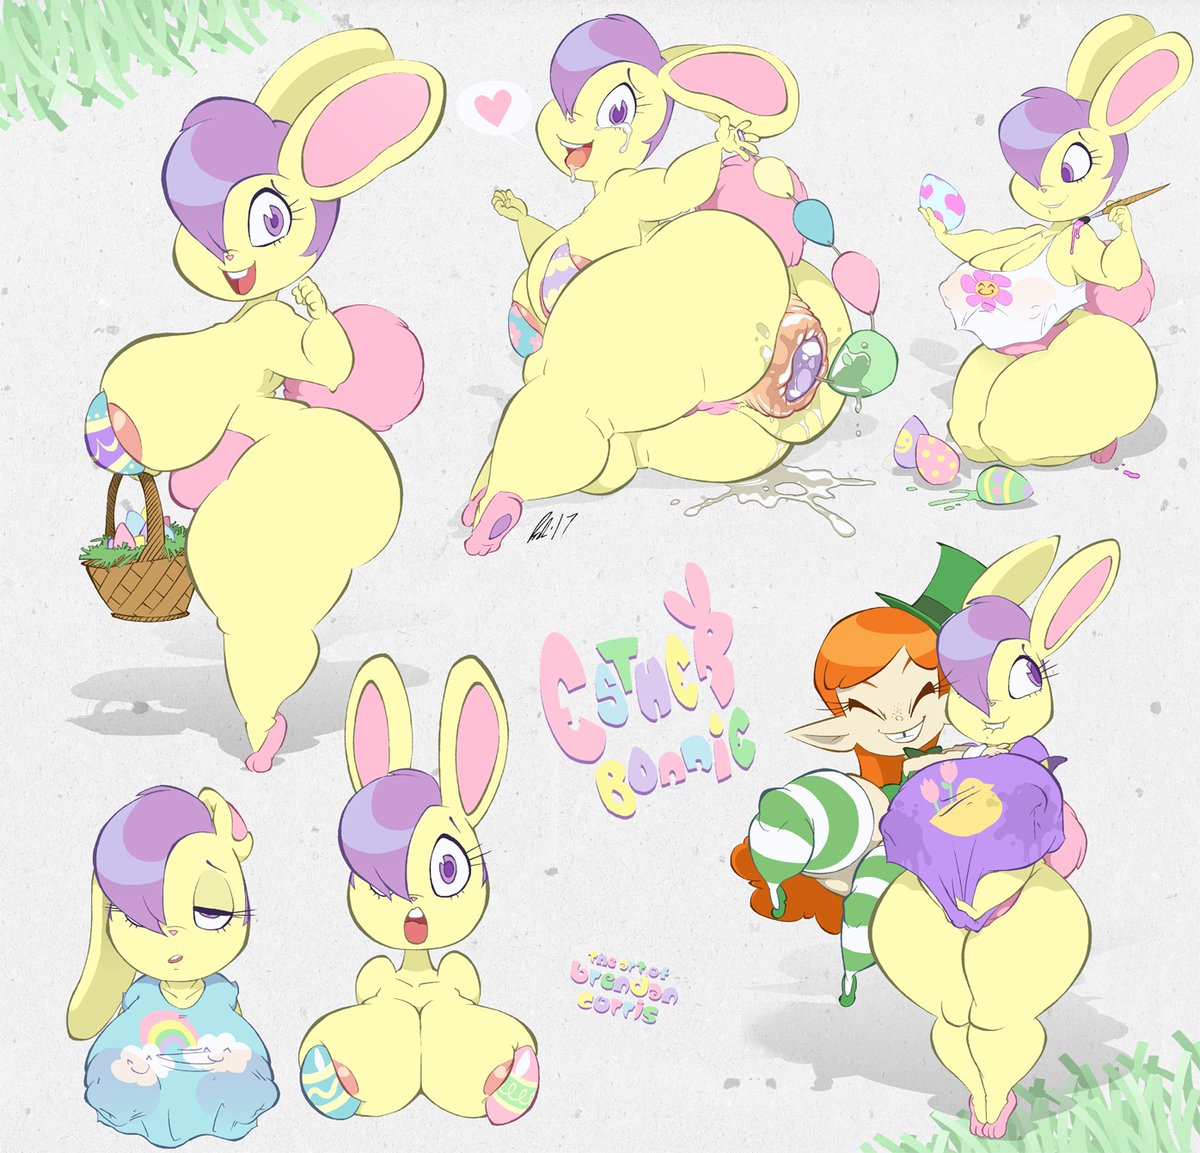 Patty Pots' girlfriend and a cute pudgy bunny. 